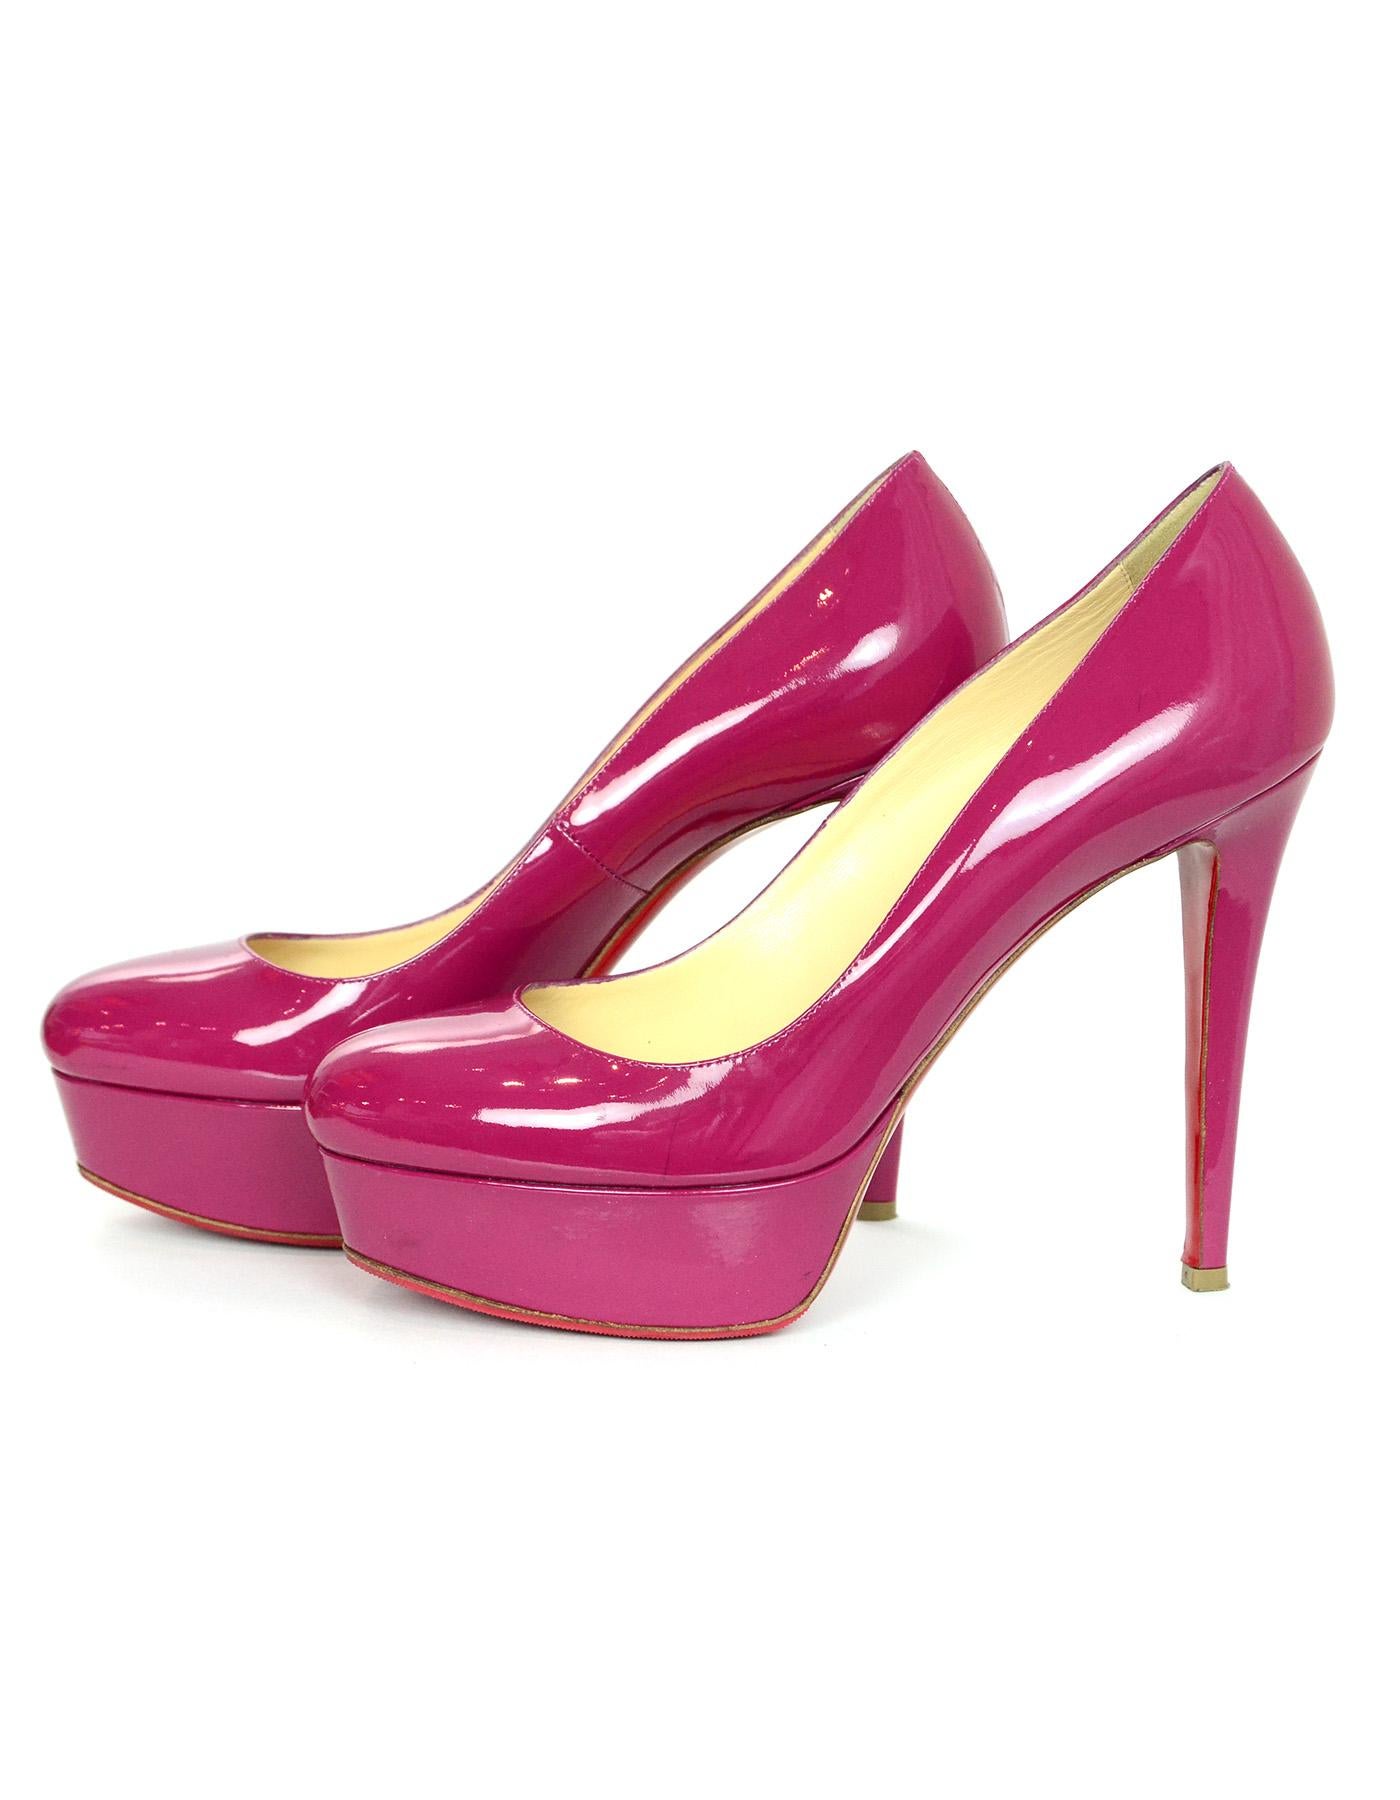 Christian Louboutin Pink Patent Leather Bianca 120 Platform Pumps Sz 39

Made In: Italy
Color: Pink
Materials: Patent Leather
Closure/Opening: Slide on
Overall Condition: Very good pre-owned condition, with exception of some markings in the patent